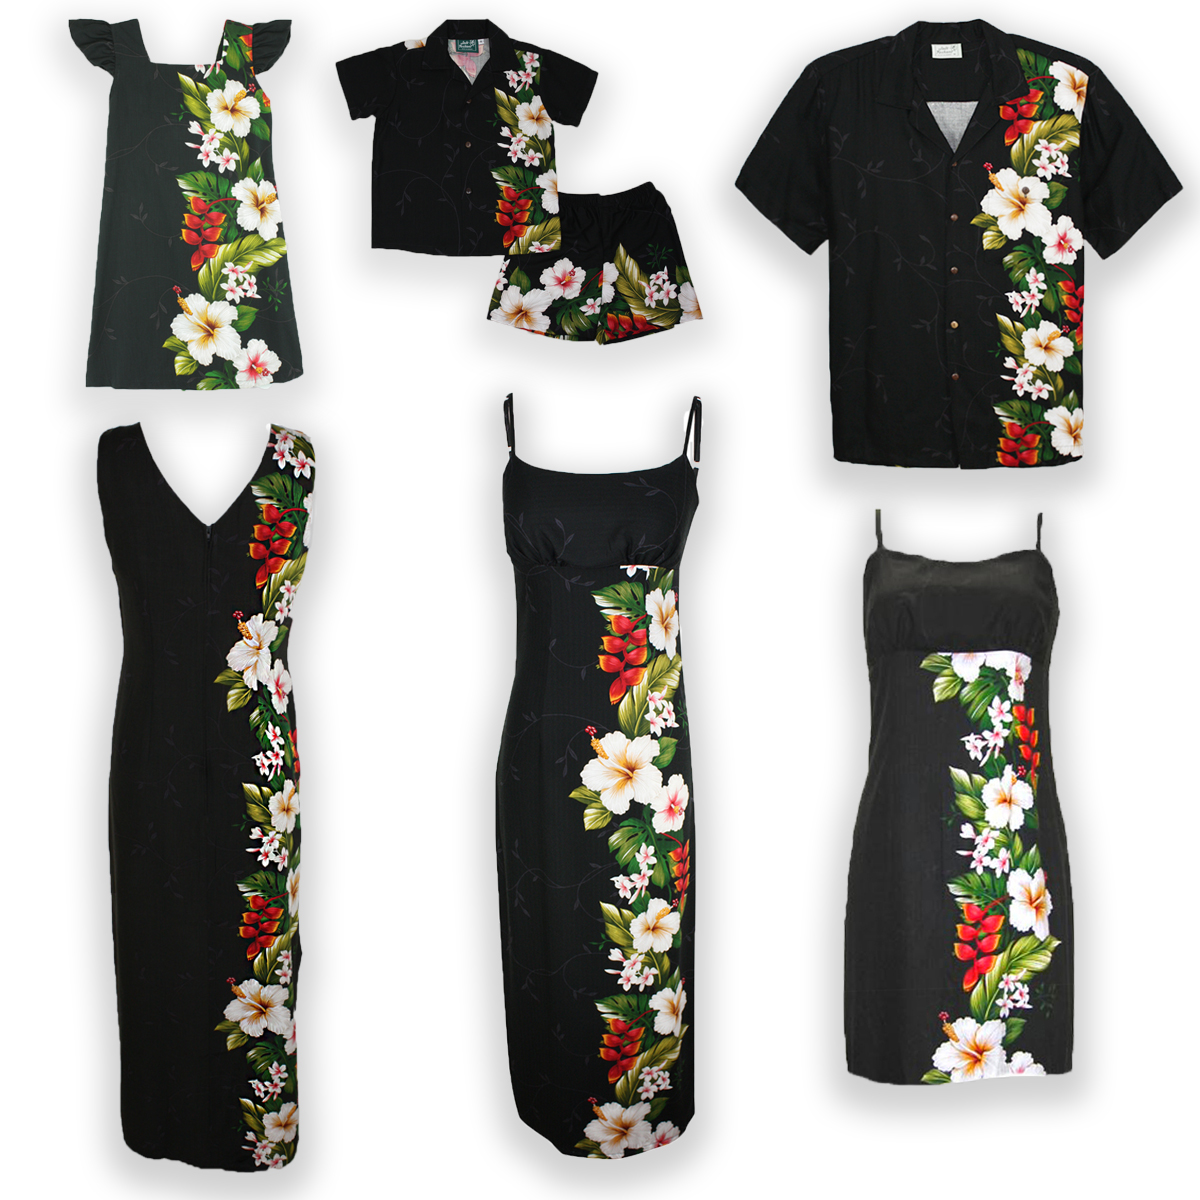 Paradise Garden Black – Family Matching Outfits